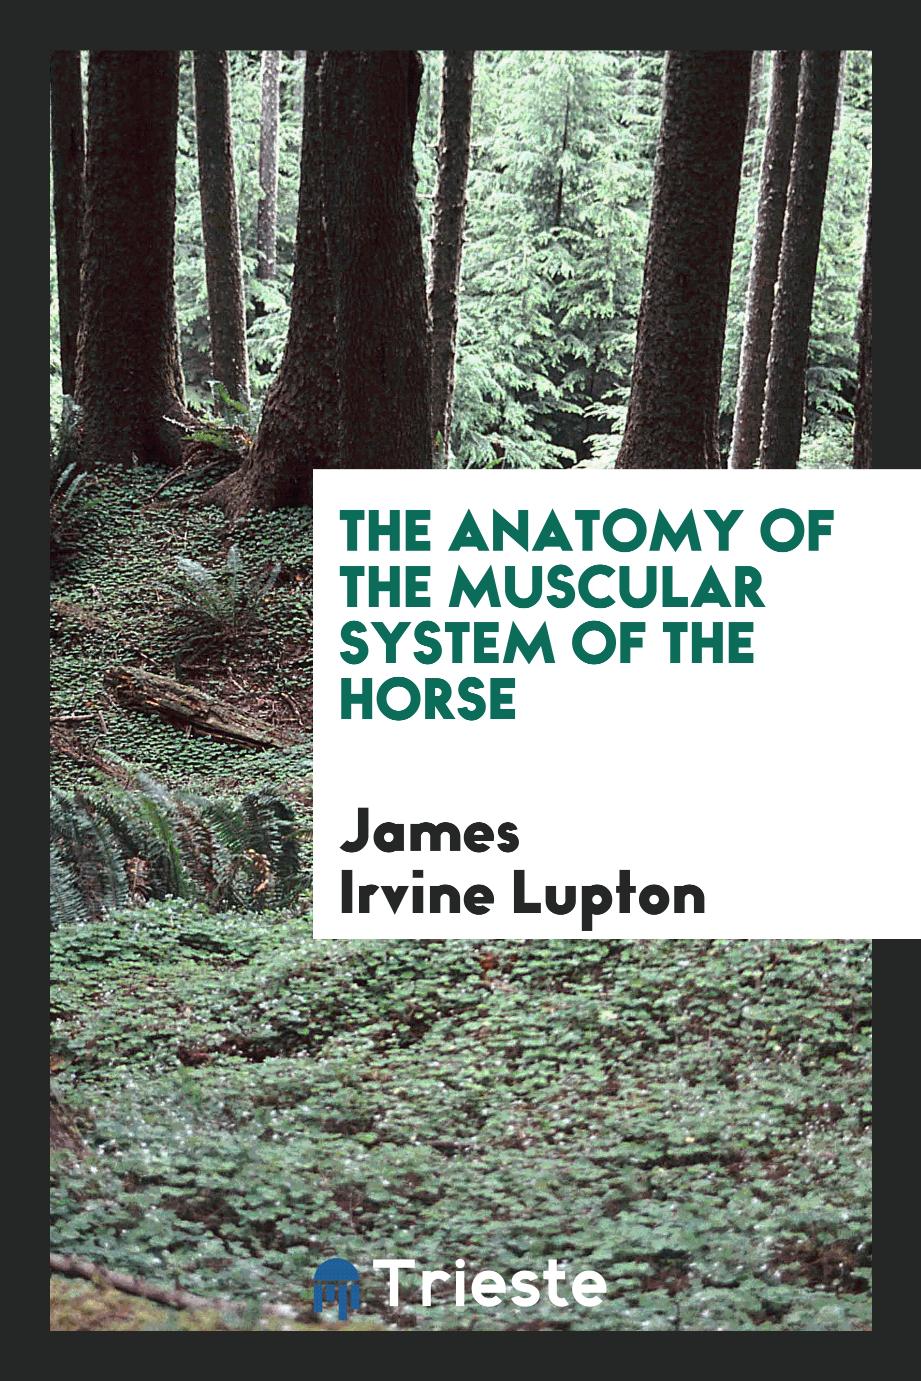 James Irvine Lupton - The Anatomy of the Muscular System of the Horse